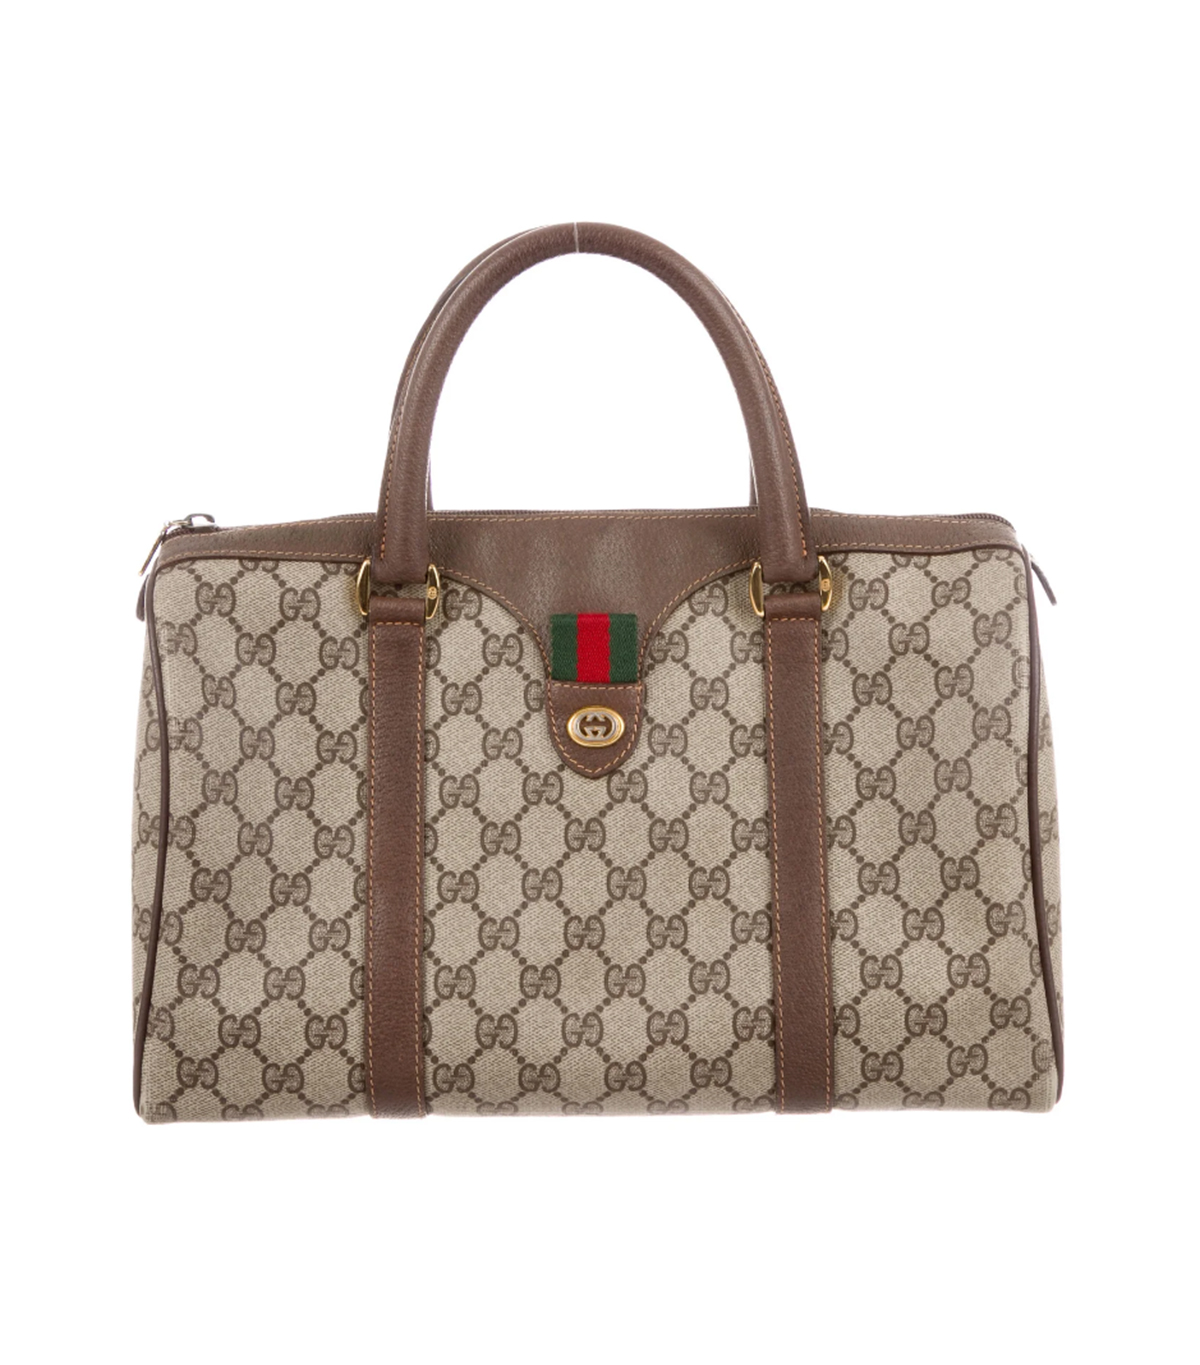 gucci old style handbags